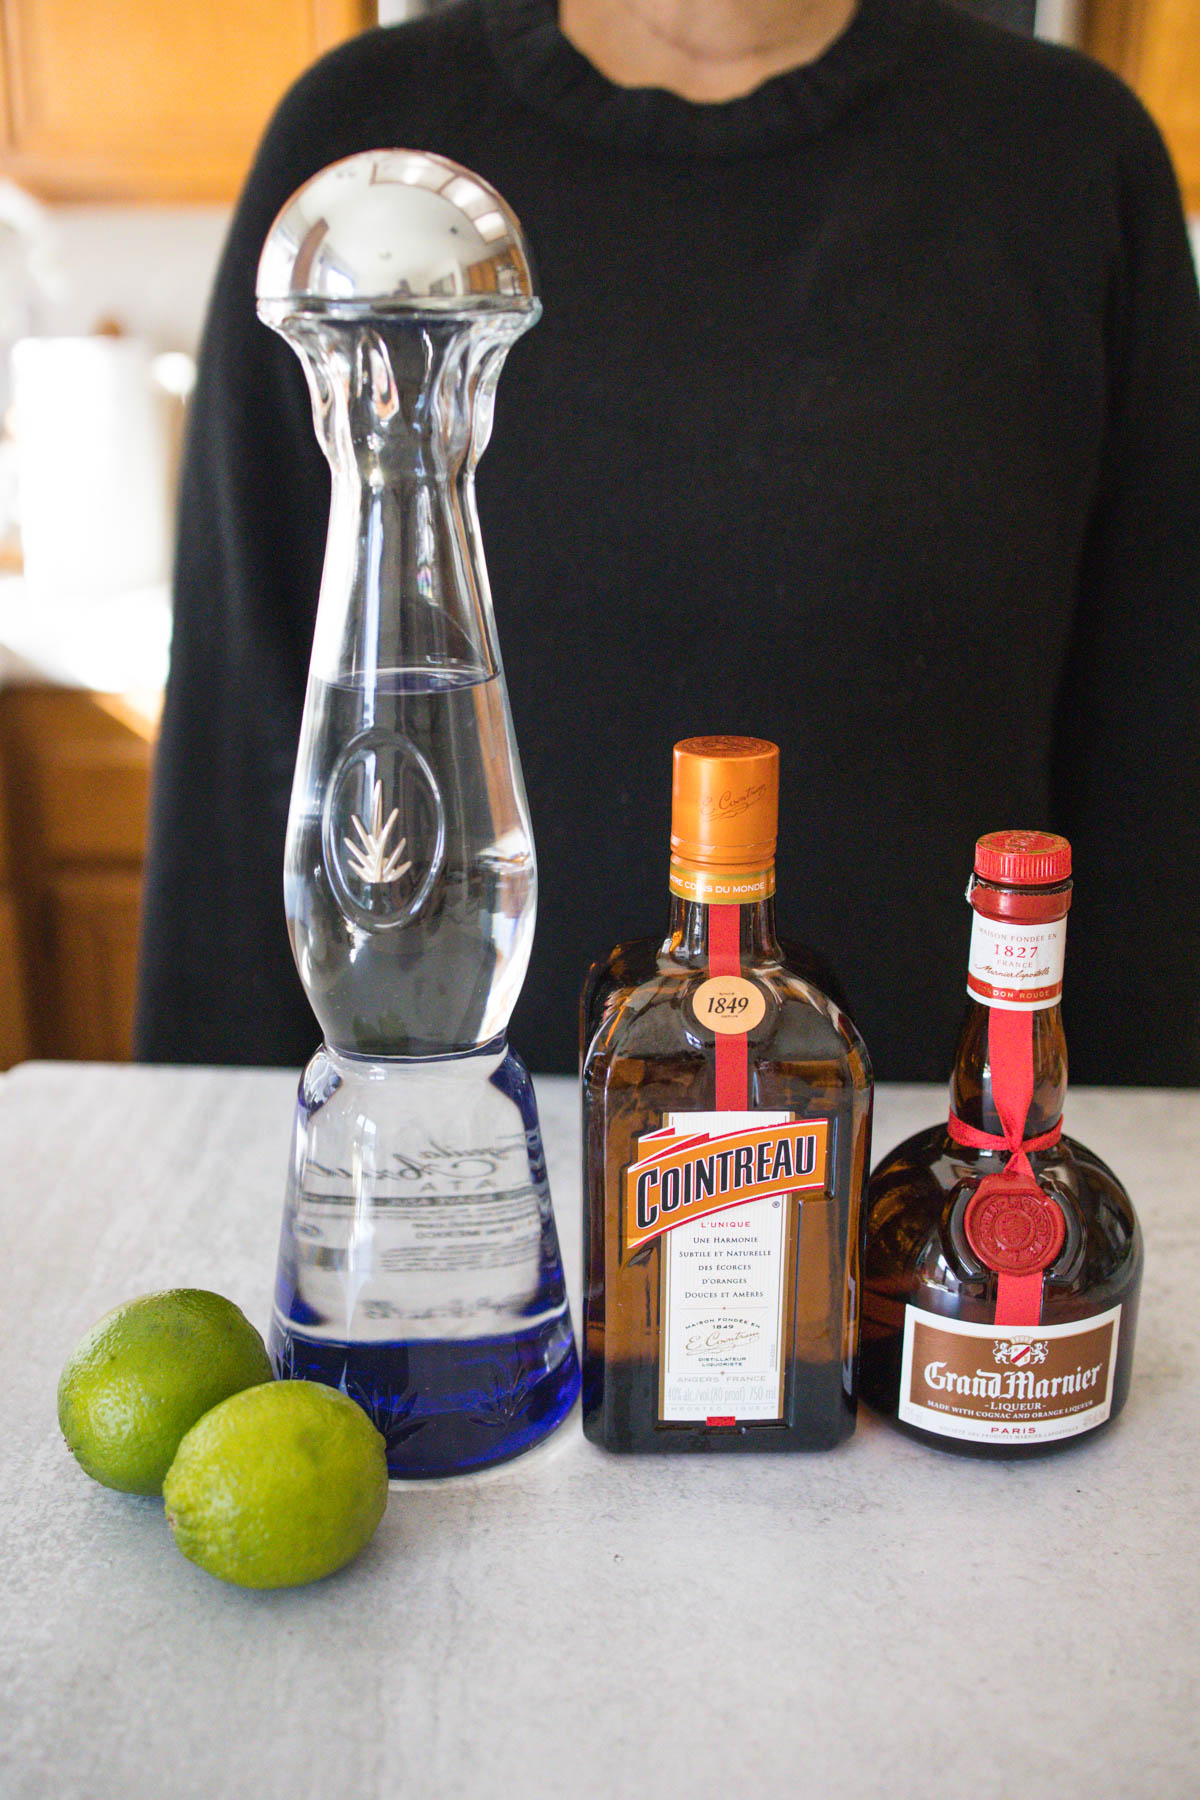 Ingredients of a cadillac margarita including fresh lime, Clase Azul tequila, Cointreau, and Grand Marnier.